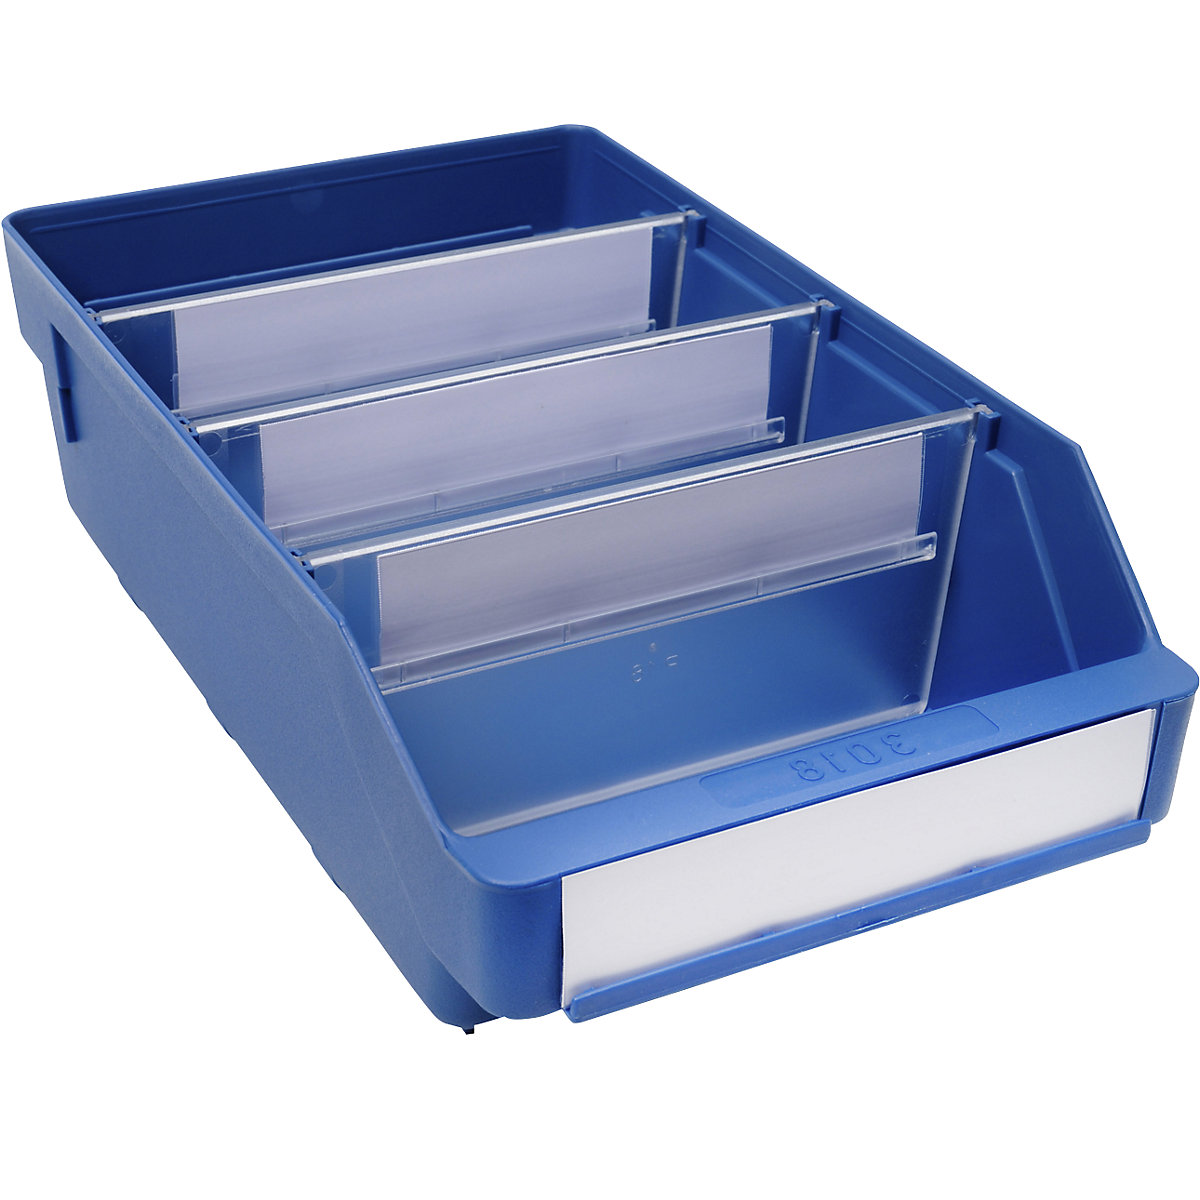 Shelf bin made of highly impact resistant polypropylene – STEMO, blue, LxWxH 300 x 180 x 95 mm, pack of 20-16